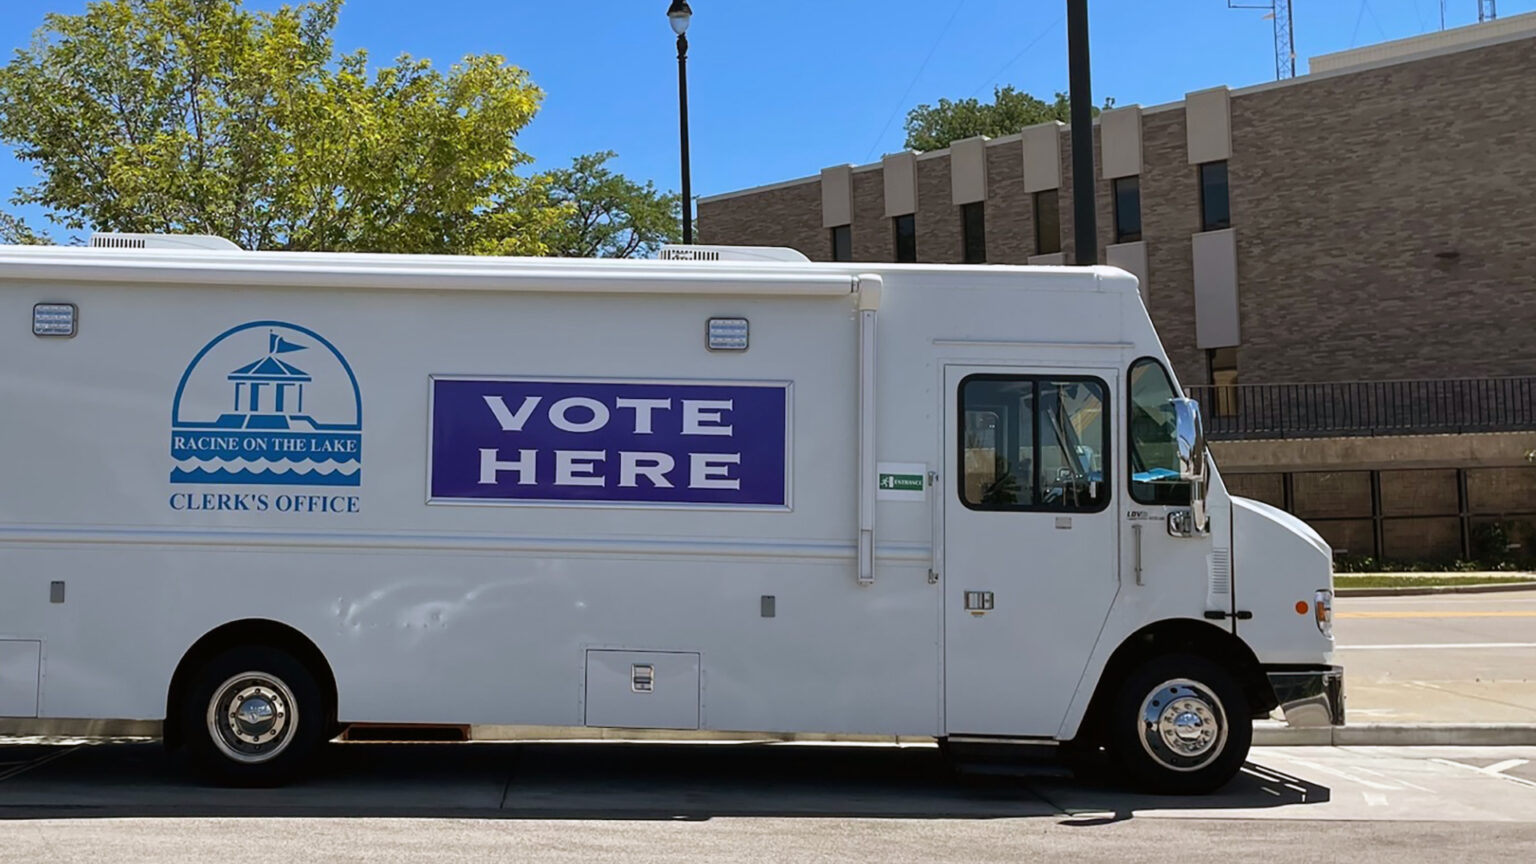 A step van with the logo of the City of Racine Clerk's office logo and the words VOTE HERE painted on its side is parked in a parking lot, with trees and a building in the background.